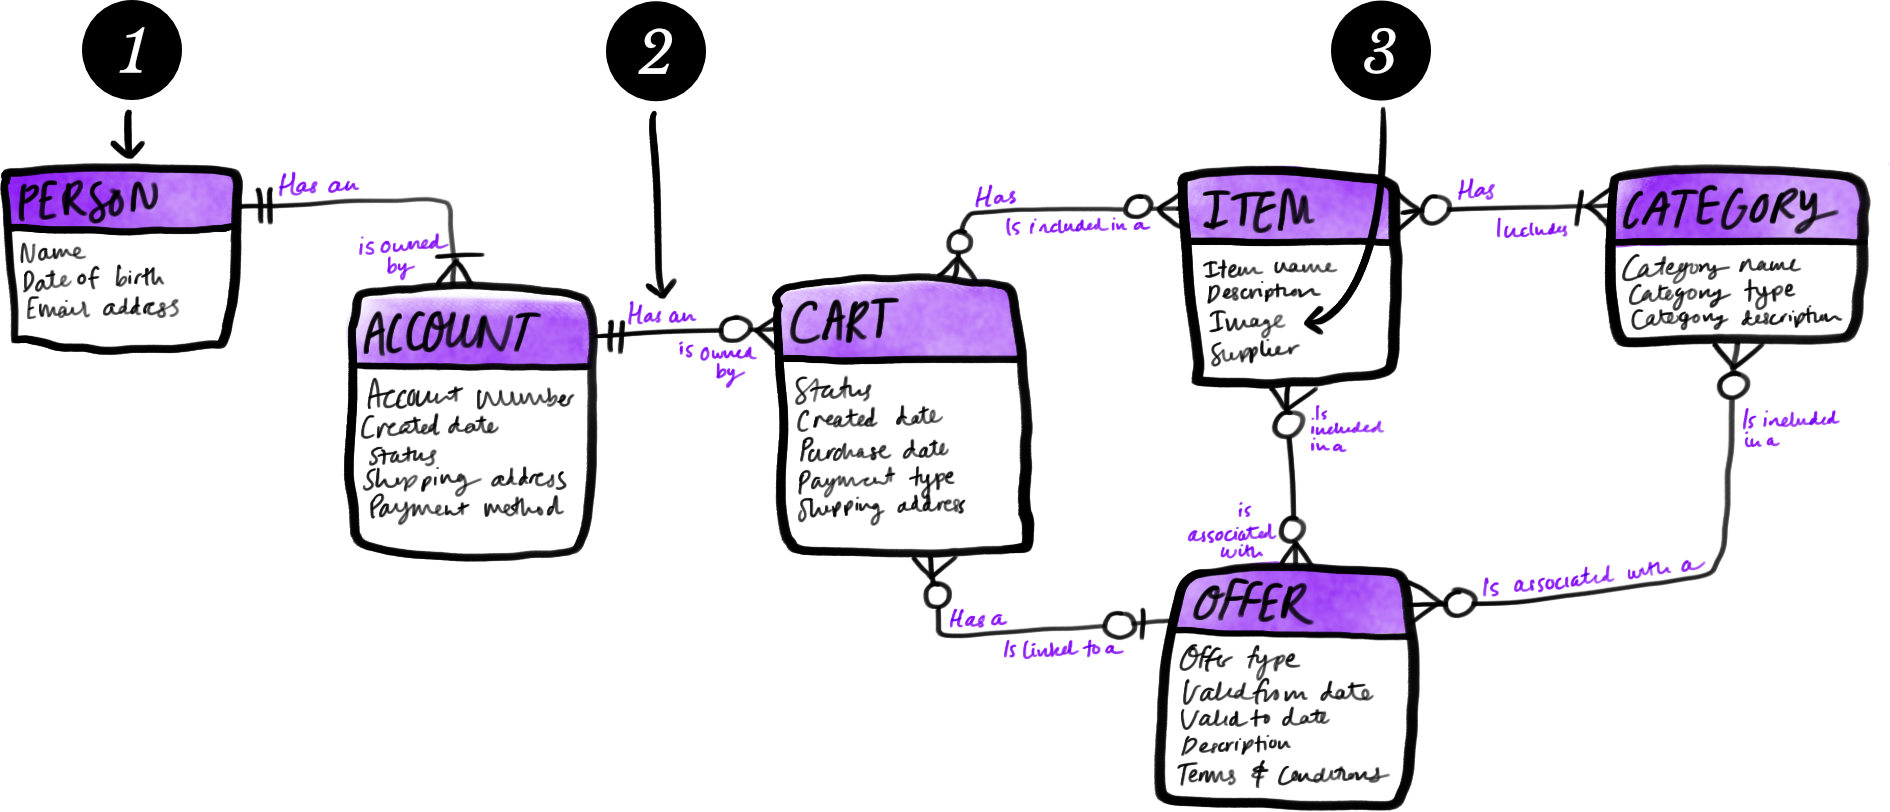 An ER Diagram shows entities such as Person, Account, and Cart, each of which has properties such as name, date of birth, etc. These entities are associated with each other with relationships such as has-an/is-owned-by.